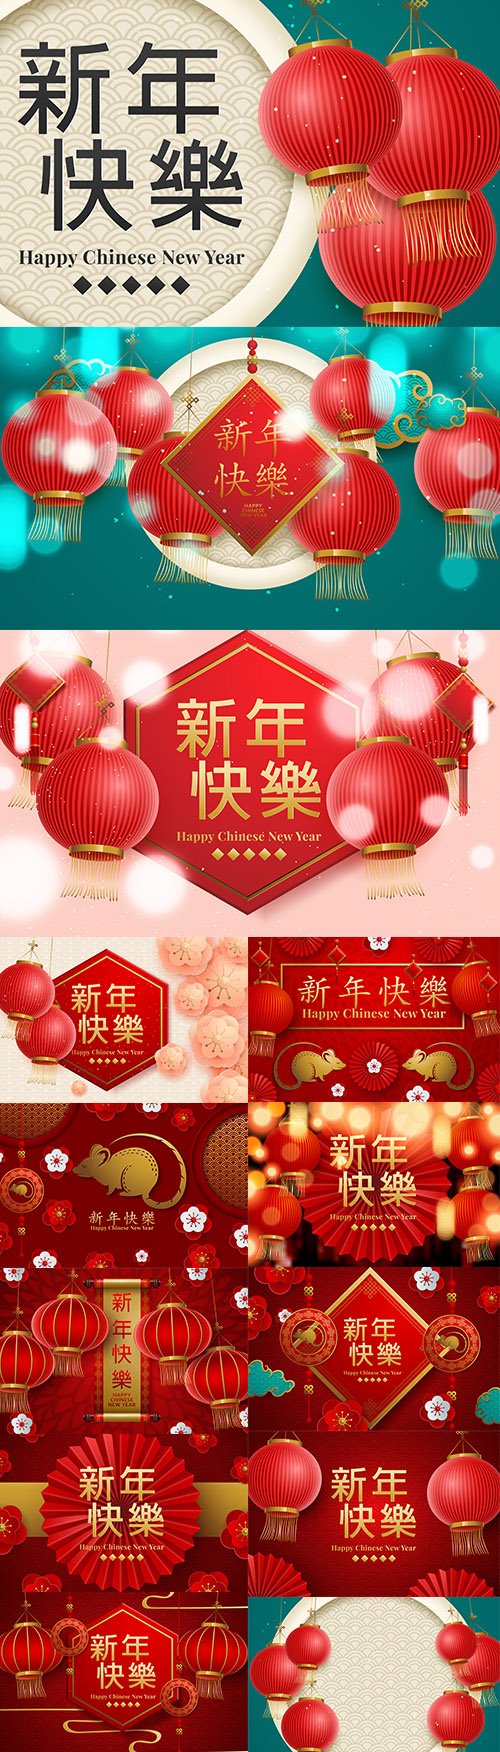 Chinese Greeting Card New Year Illustration Vol 2